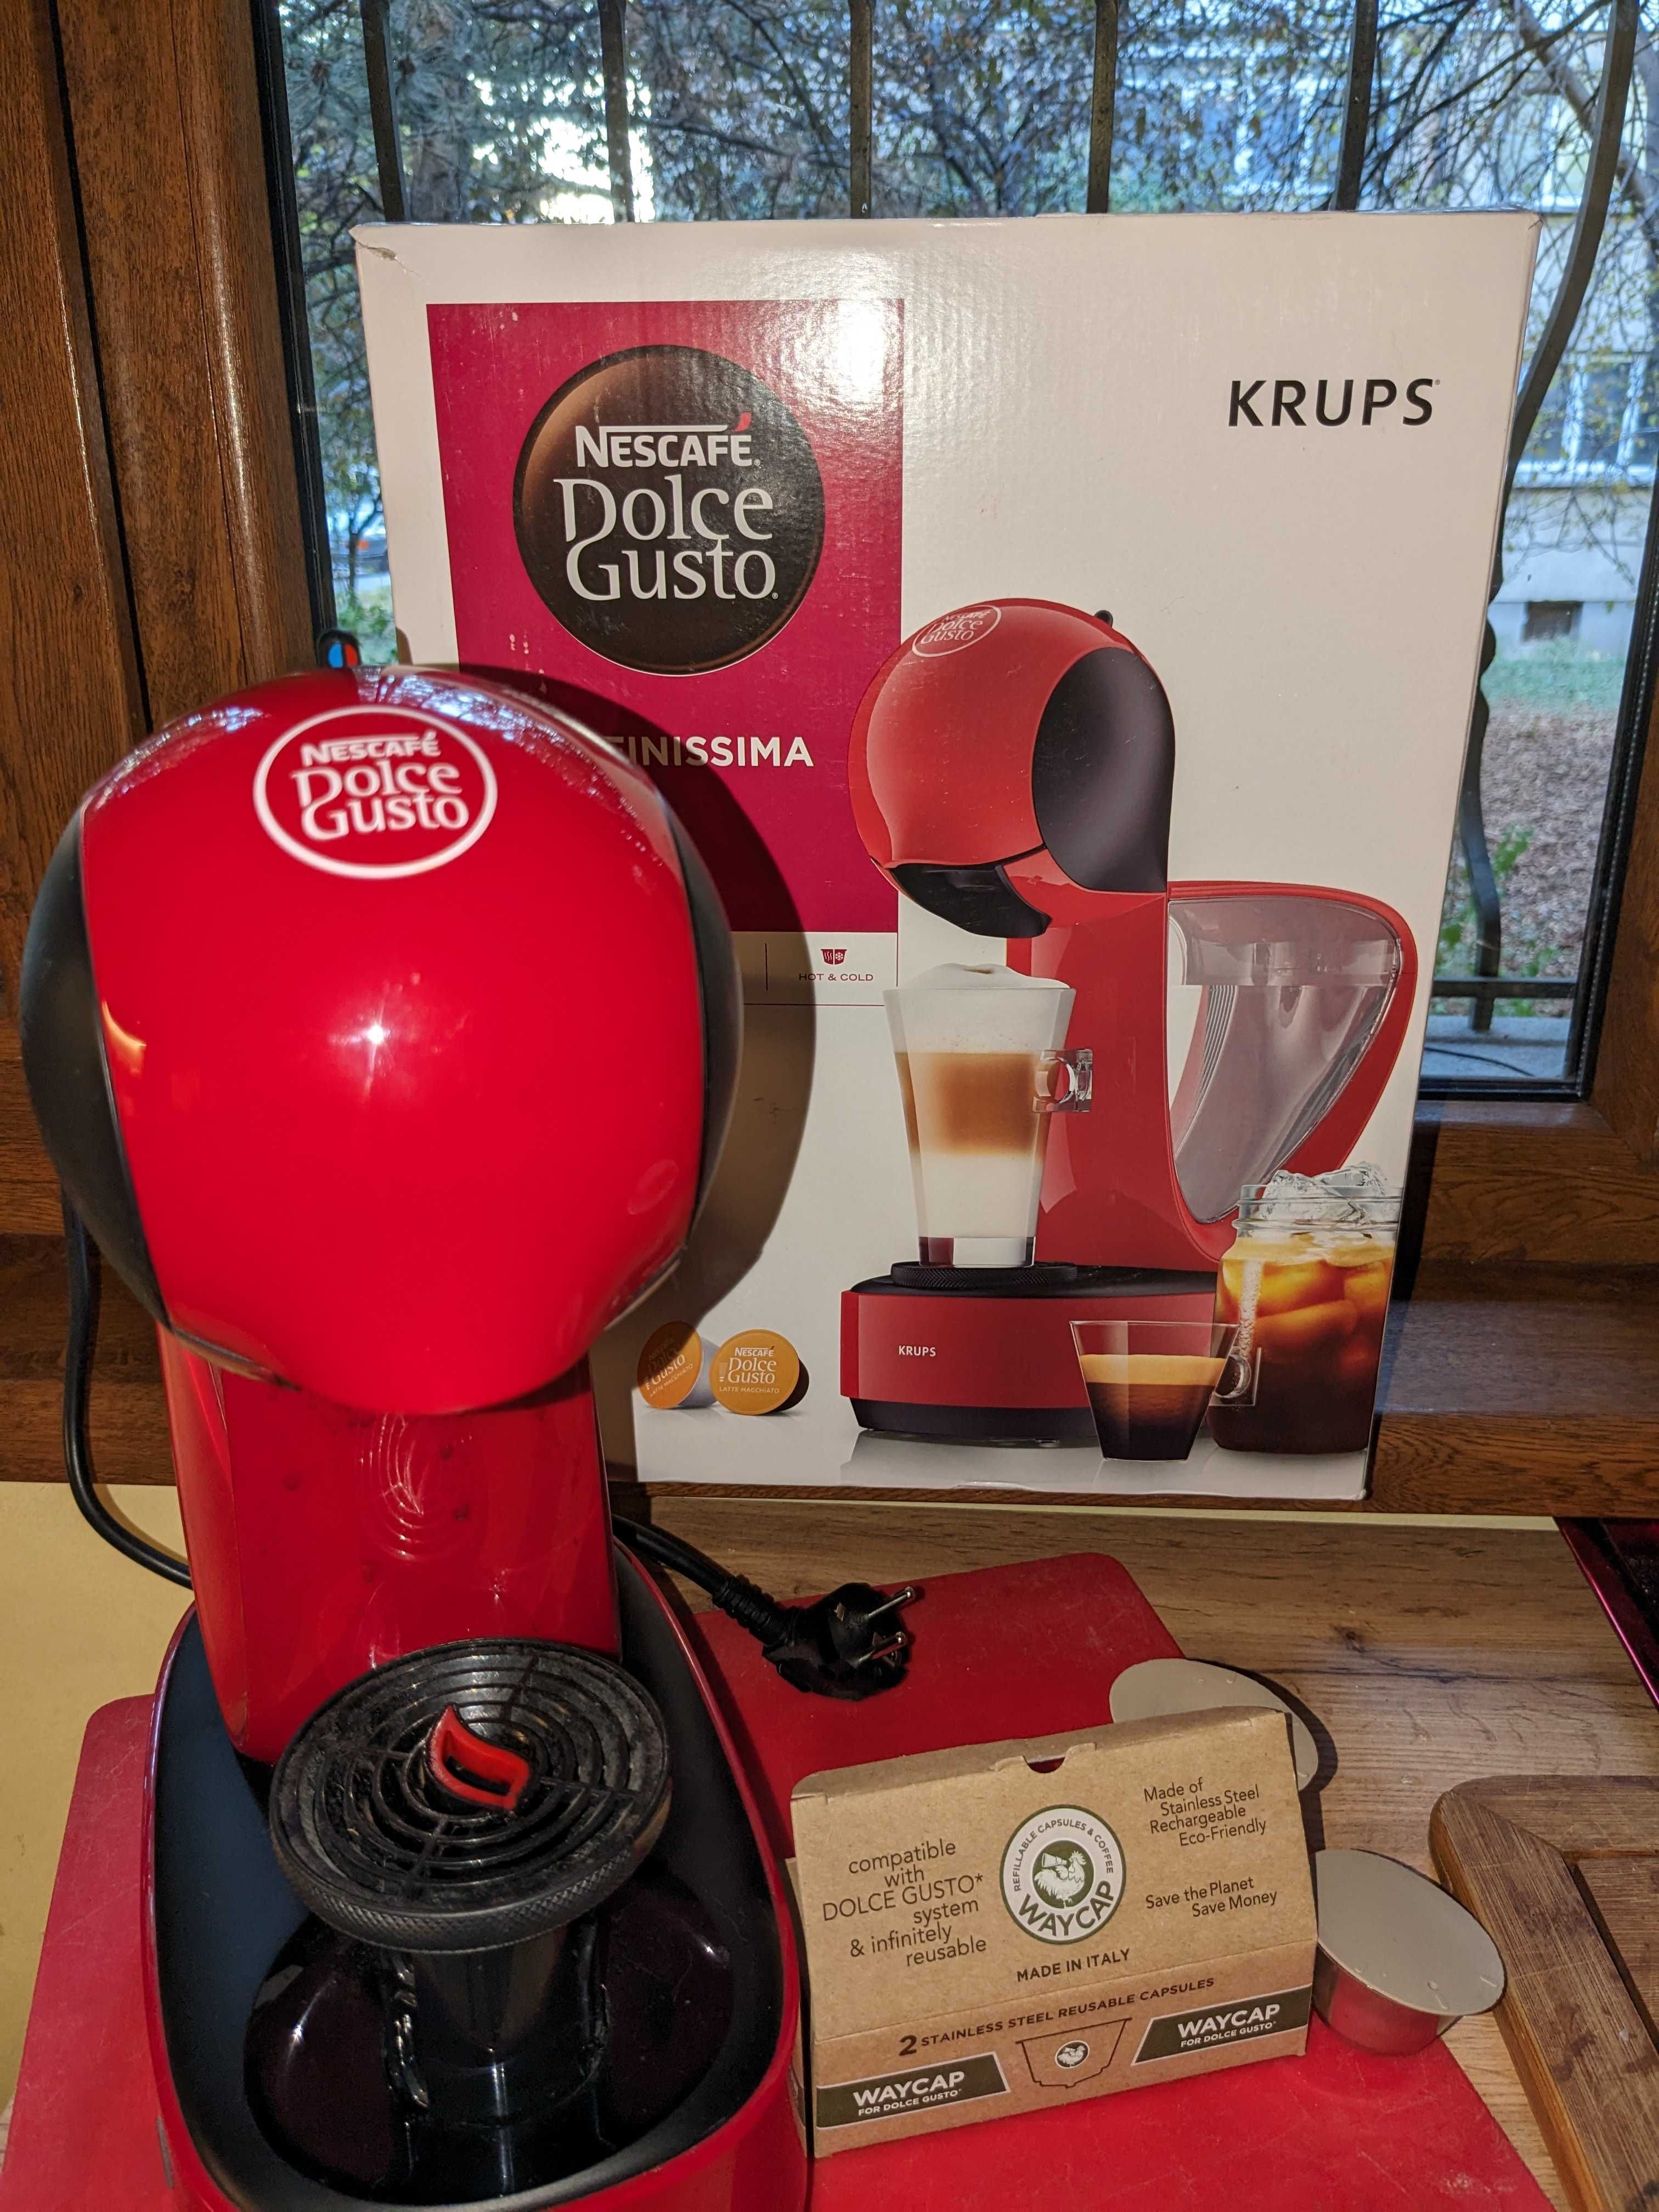 Krups Dolce Gusto кафемашина плюс две капсули за многократна употреба